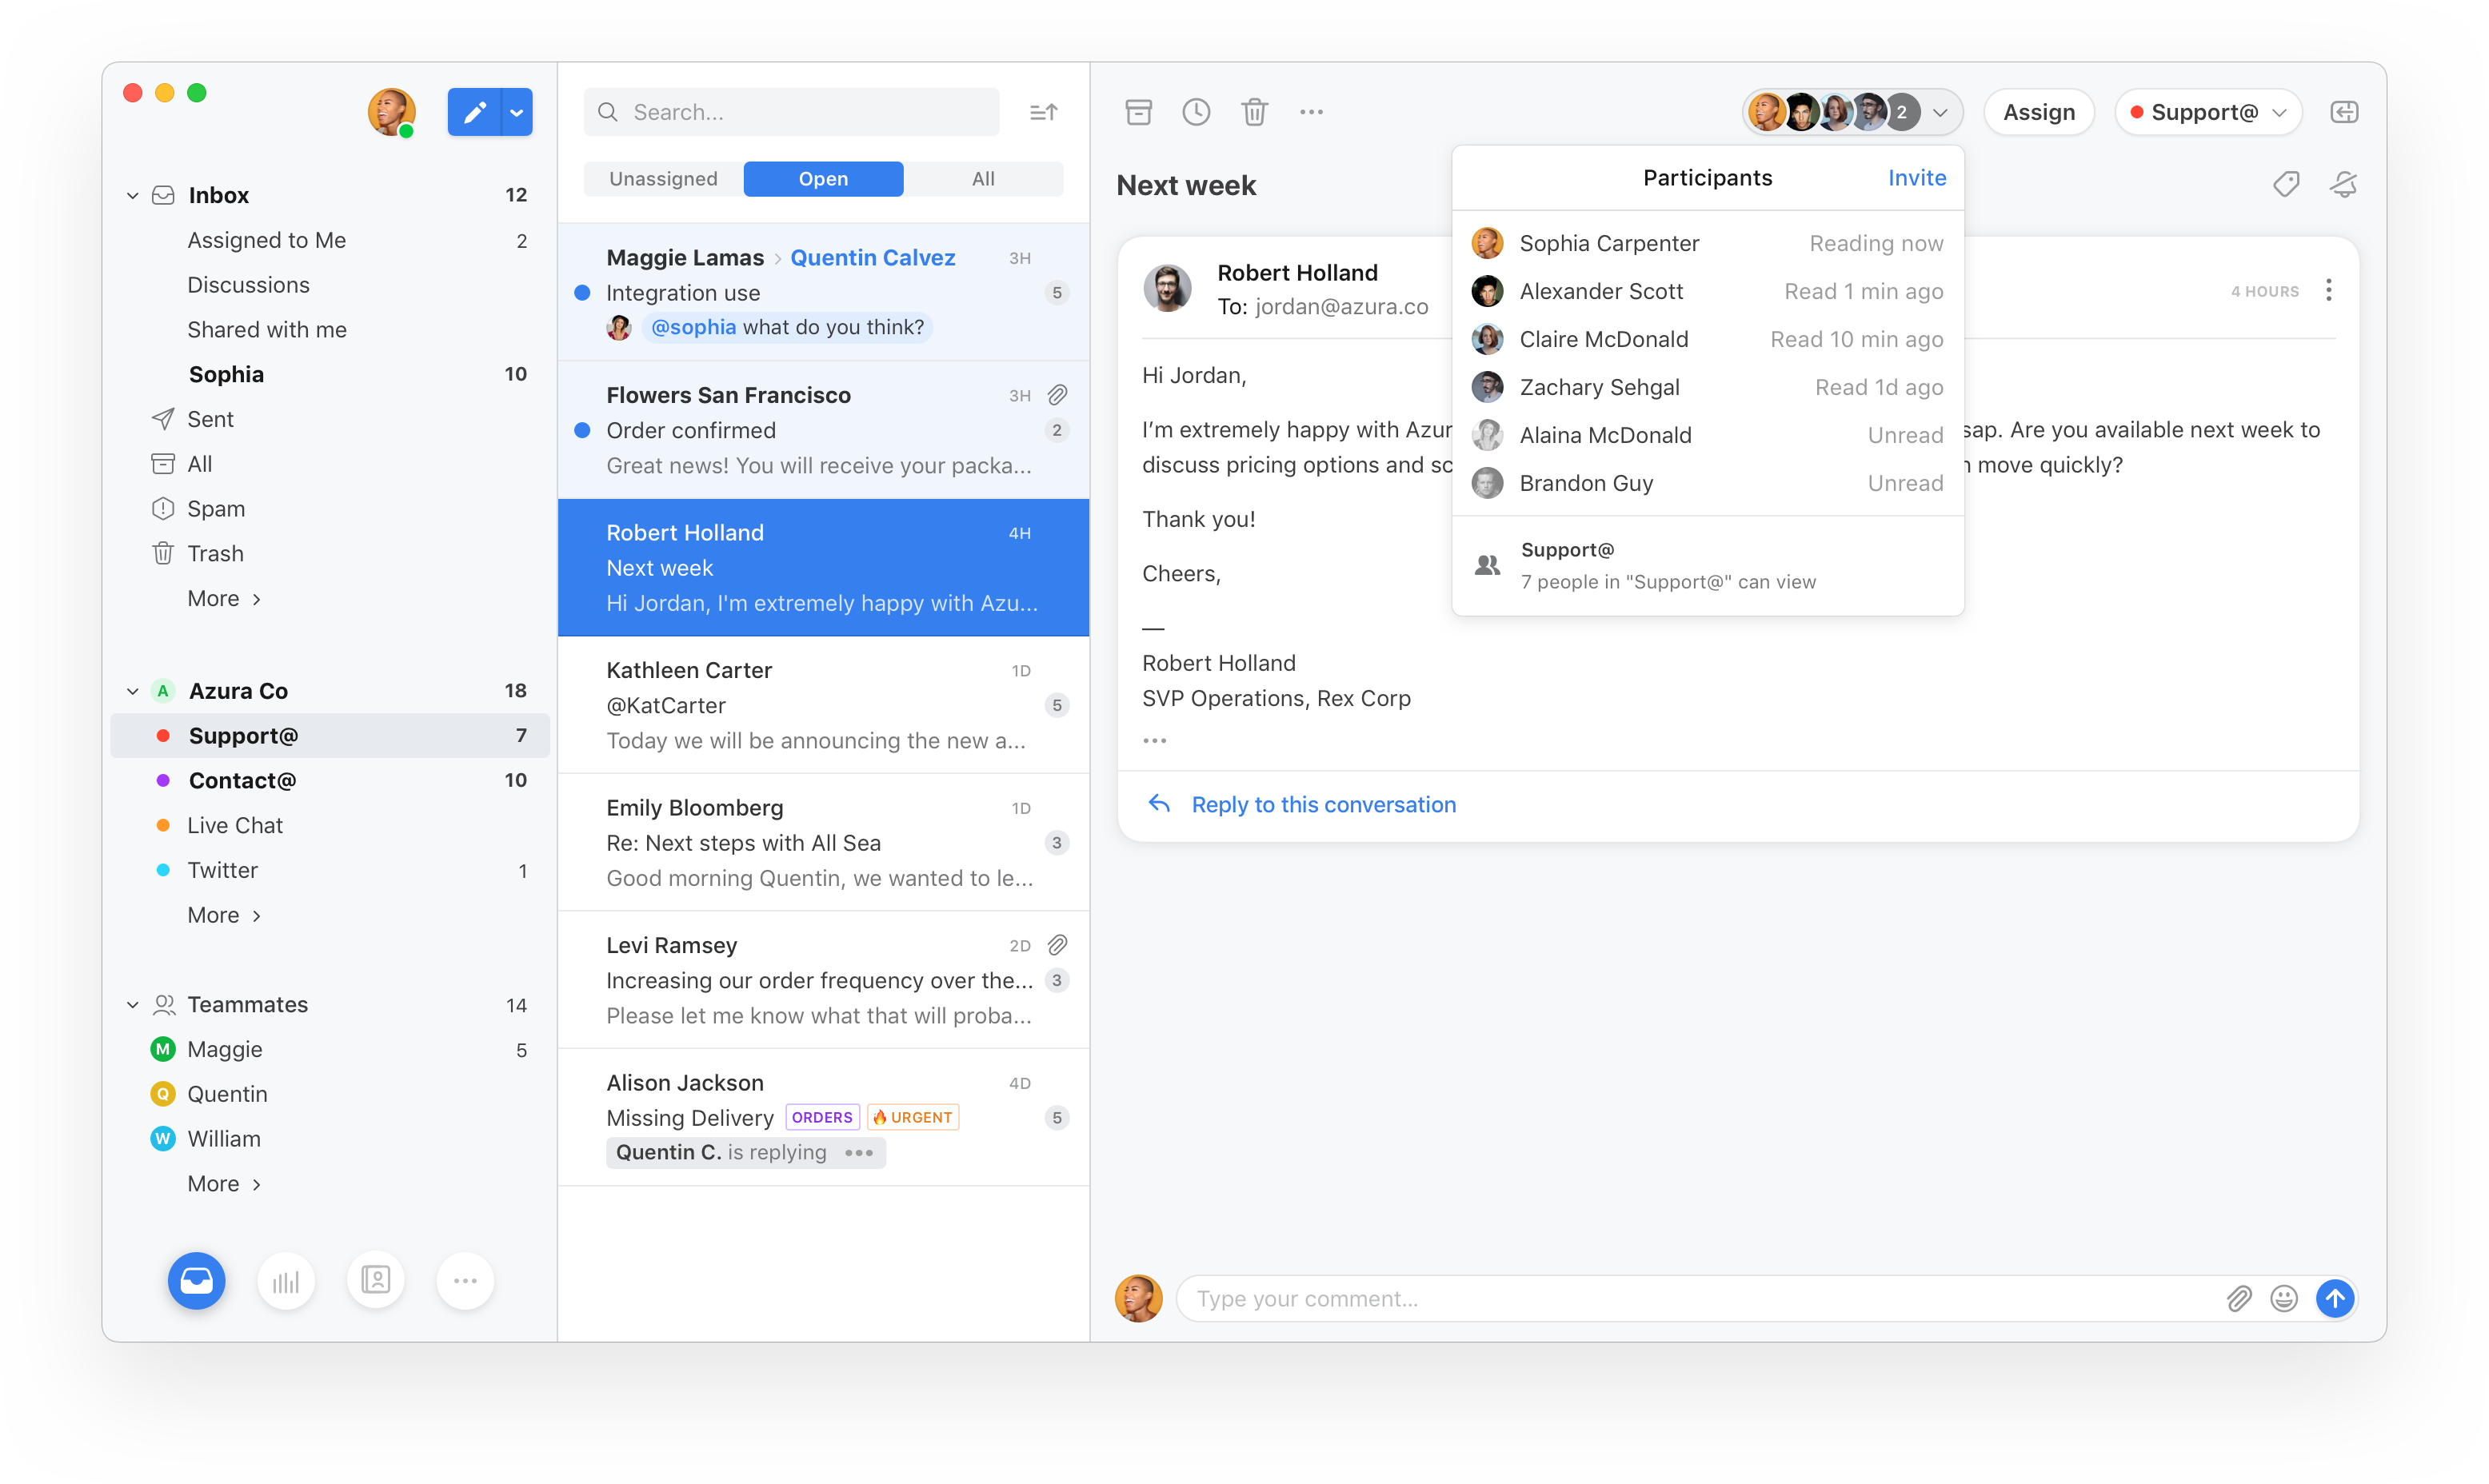 Shared inbox startup Front raises $59 million round led by other tech CEOs